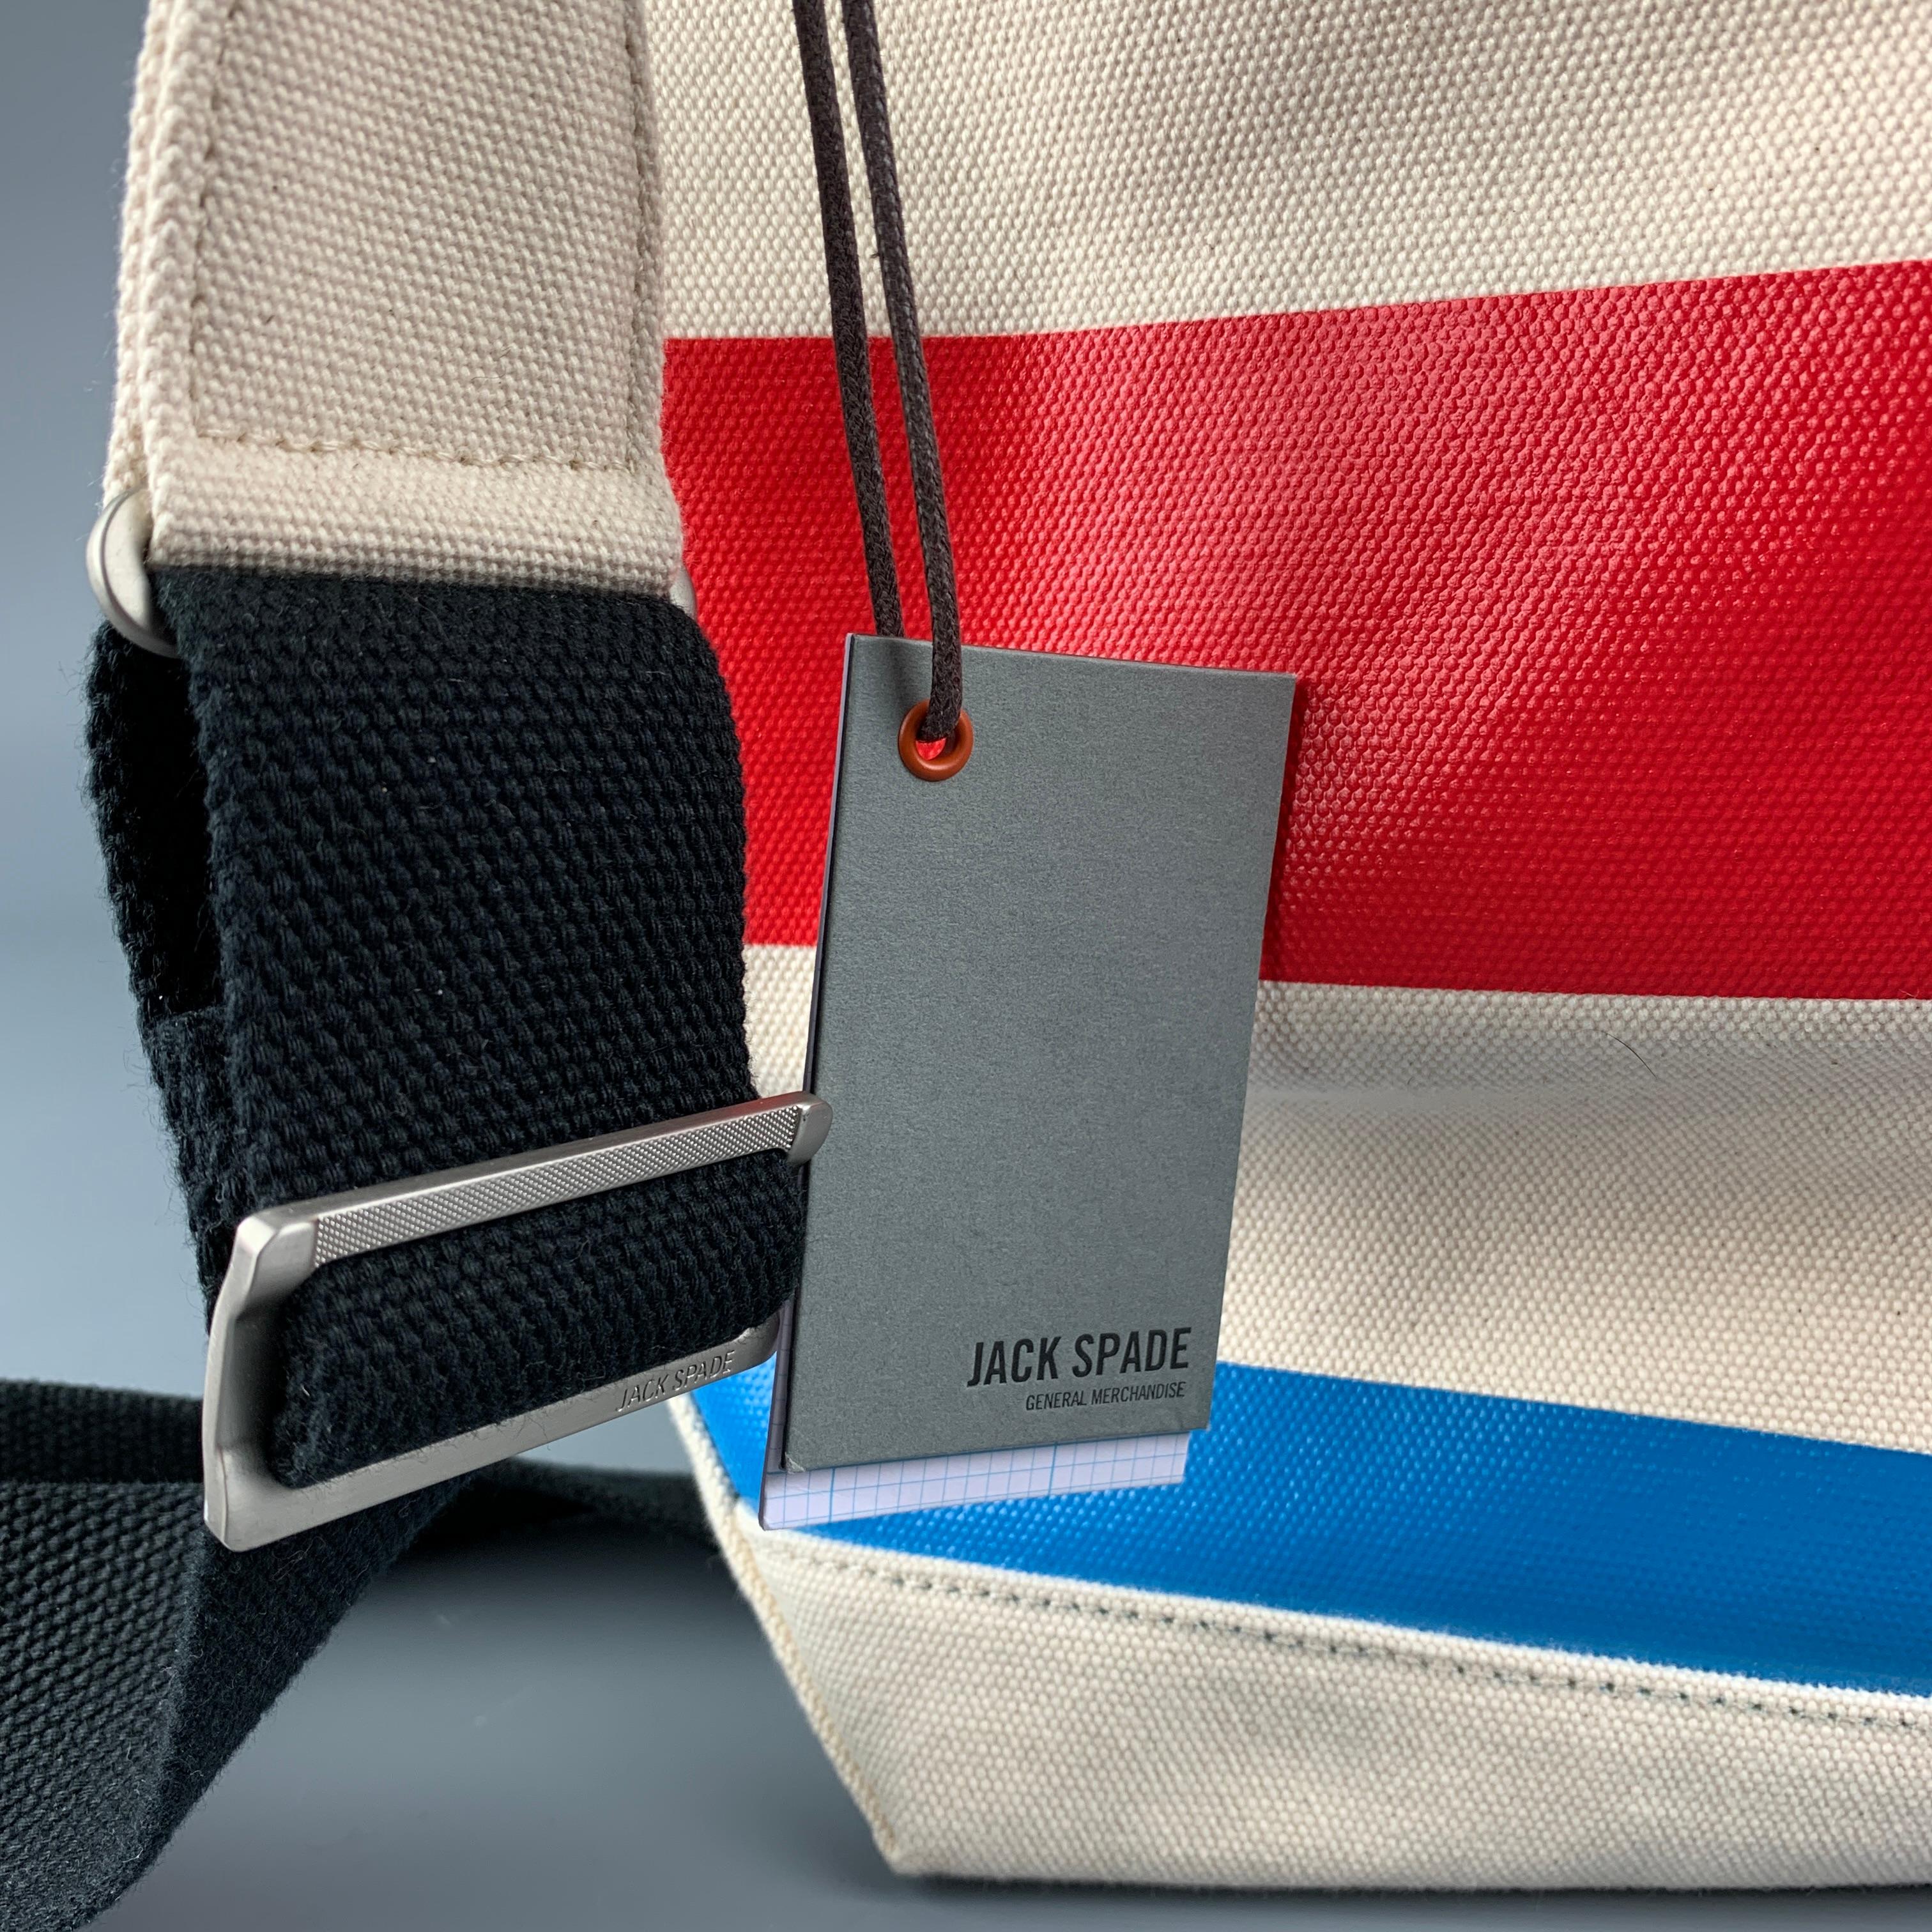 JACK SPADE bag comes in a multi-color stripe coated canvas featuring a tote style, top handles, removable shoulder strap, and a inner compartment.

New With Tags.

Measurements:

Length: 16 in.
Width: 6.5 in.
Height: 13 in.
Drop: 27.5 in. 